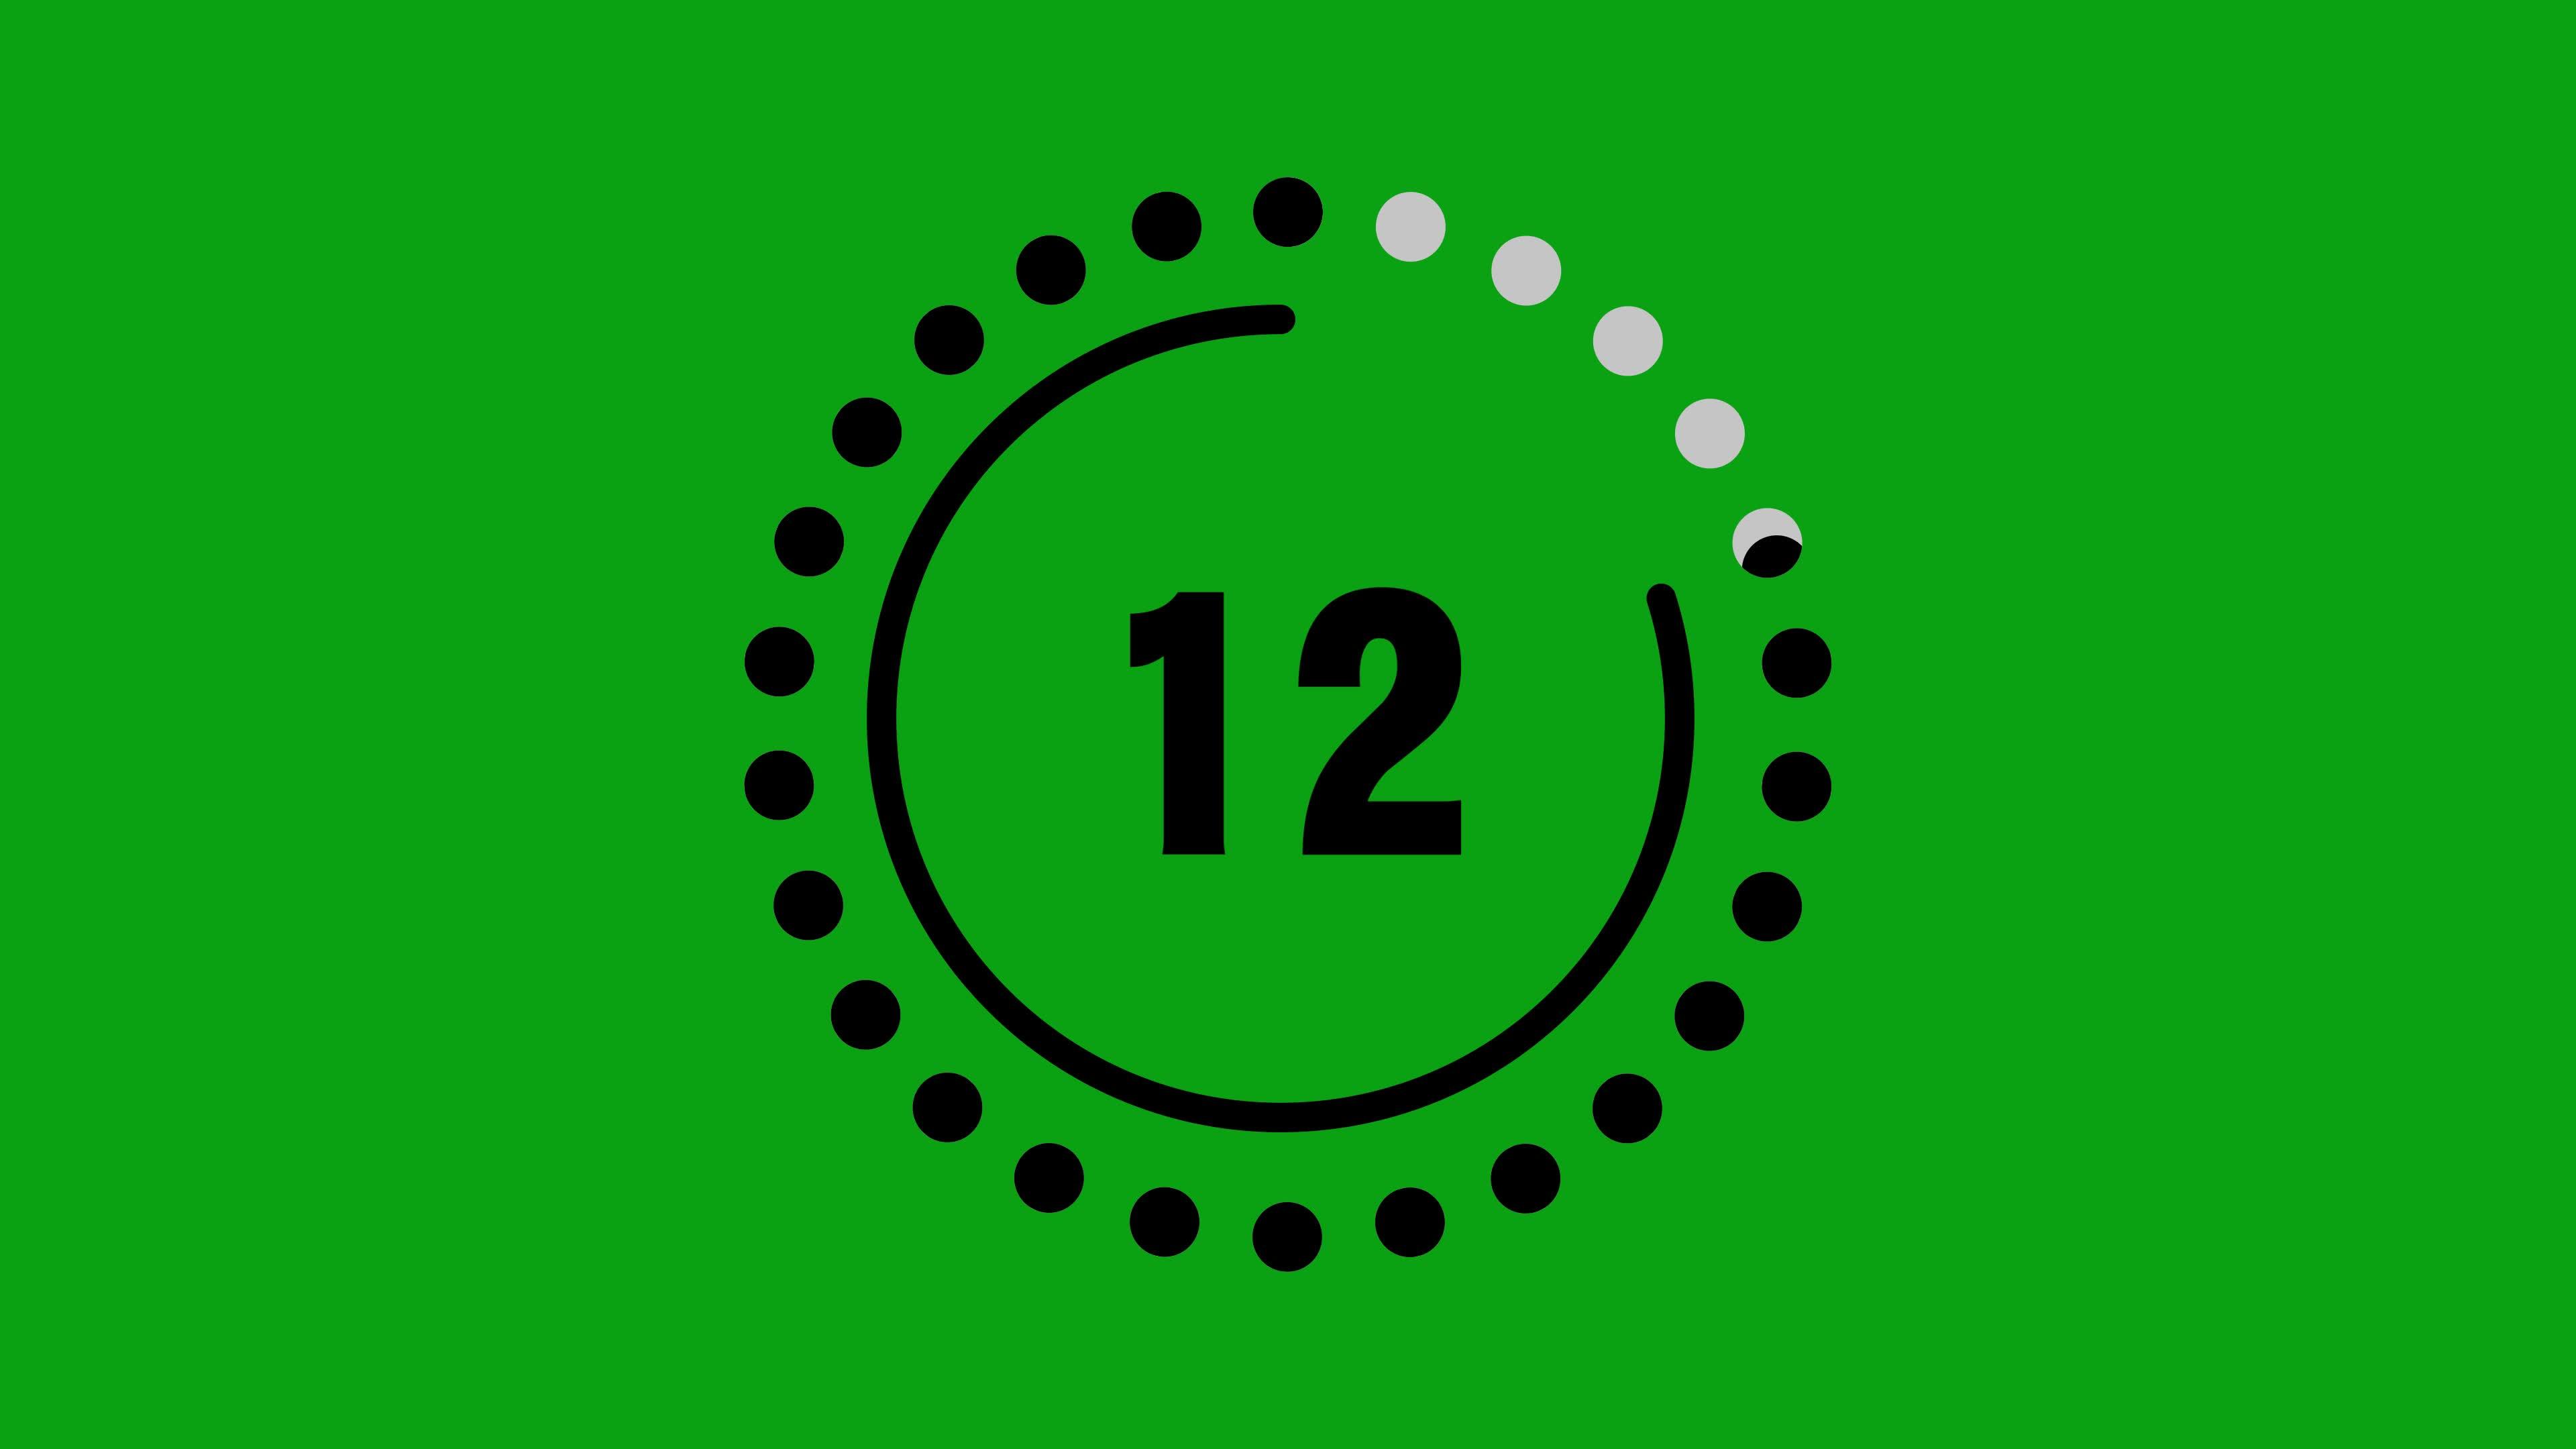 15 second animation from 15 to 0 seconds. Modern flat design with ...